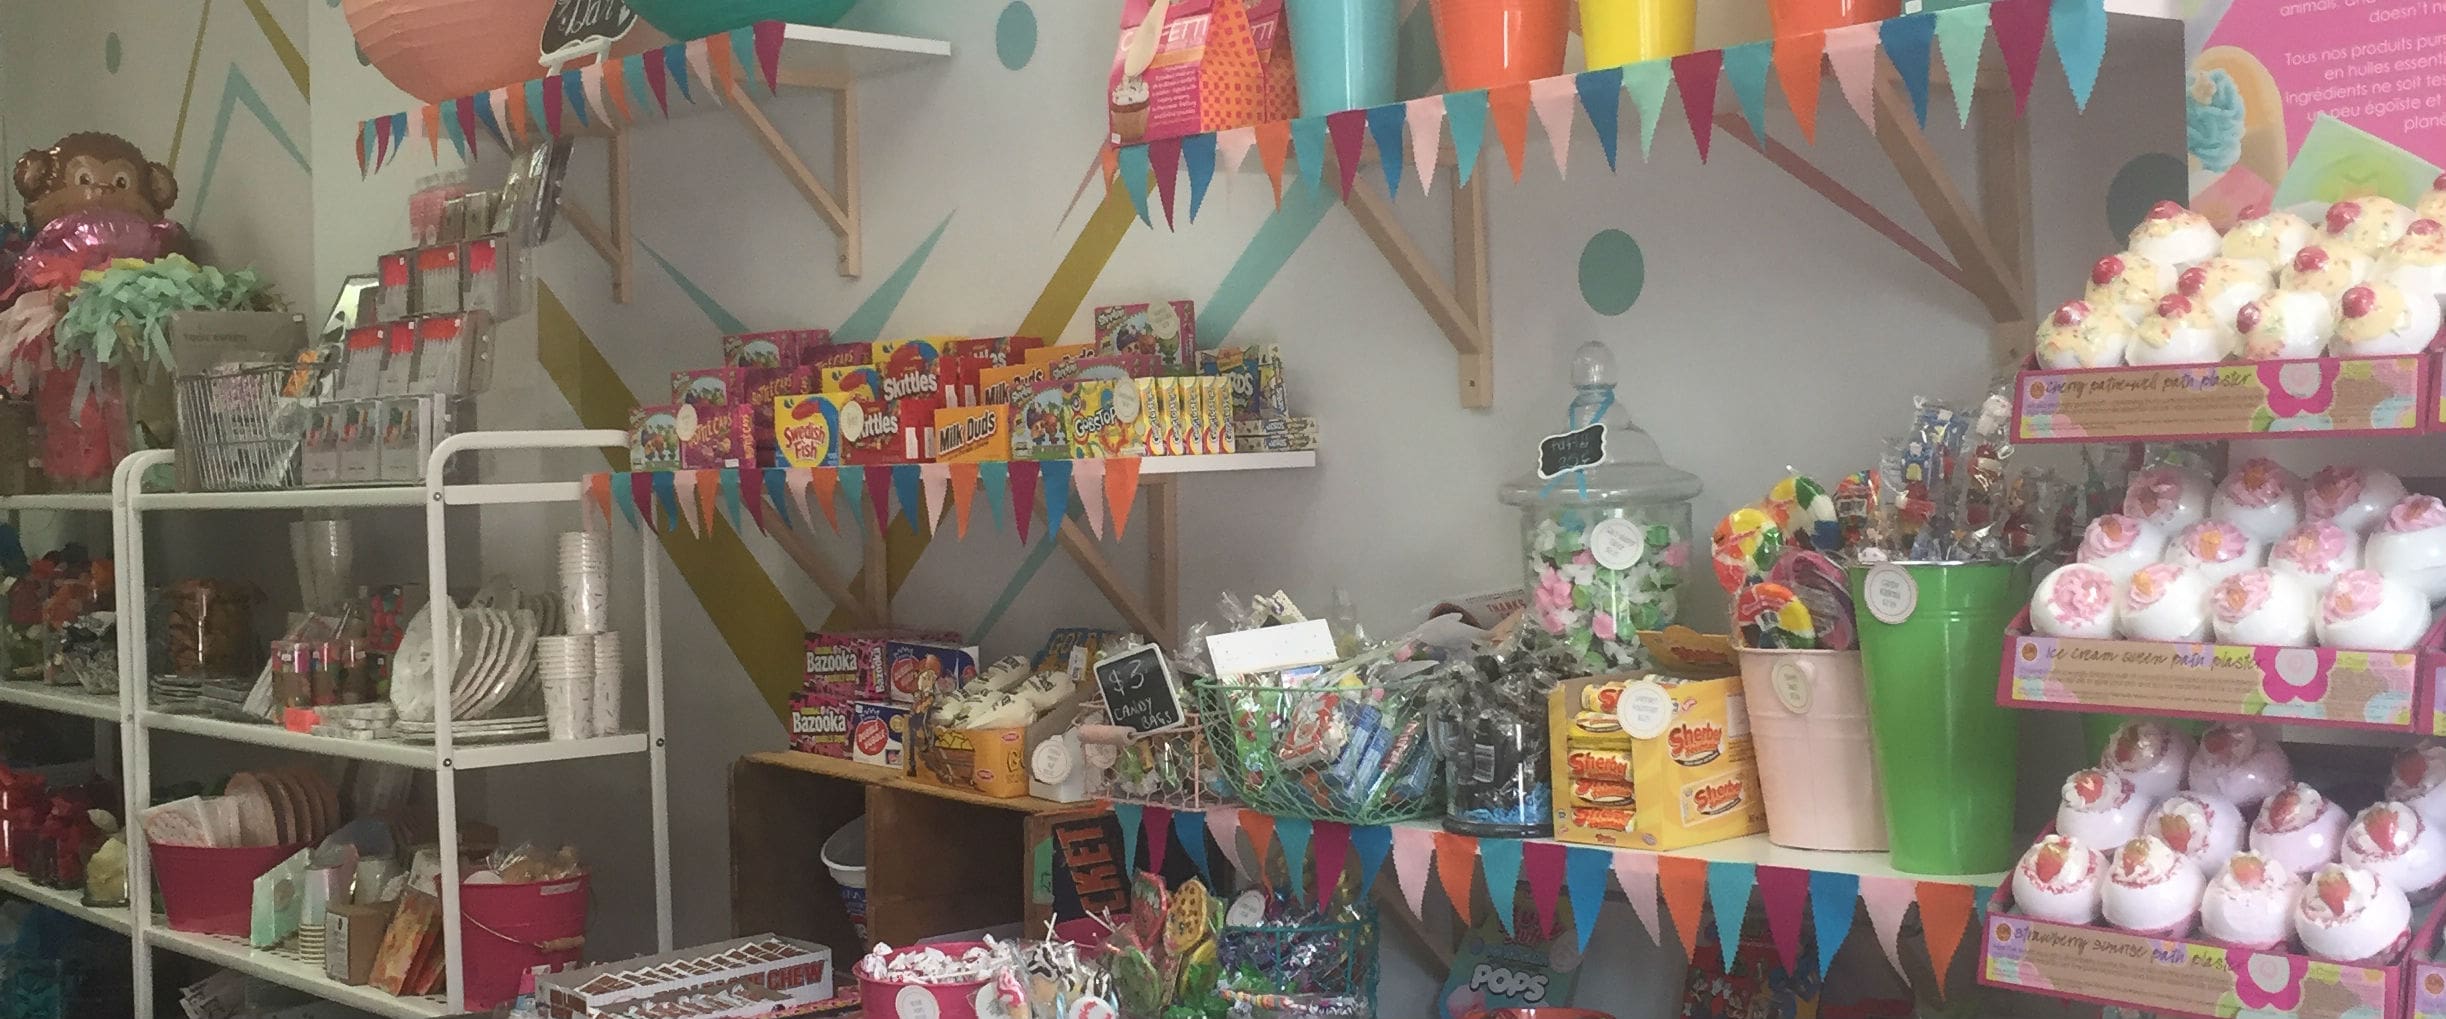 Toronto's Best Kids' Party Supplies Stores